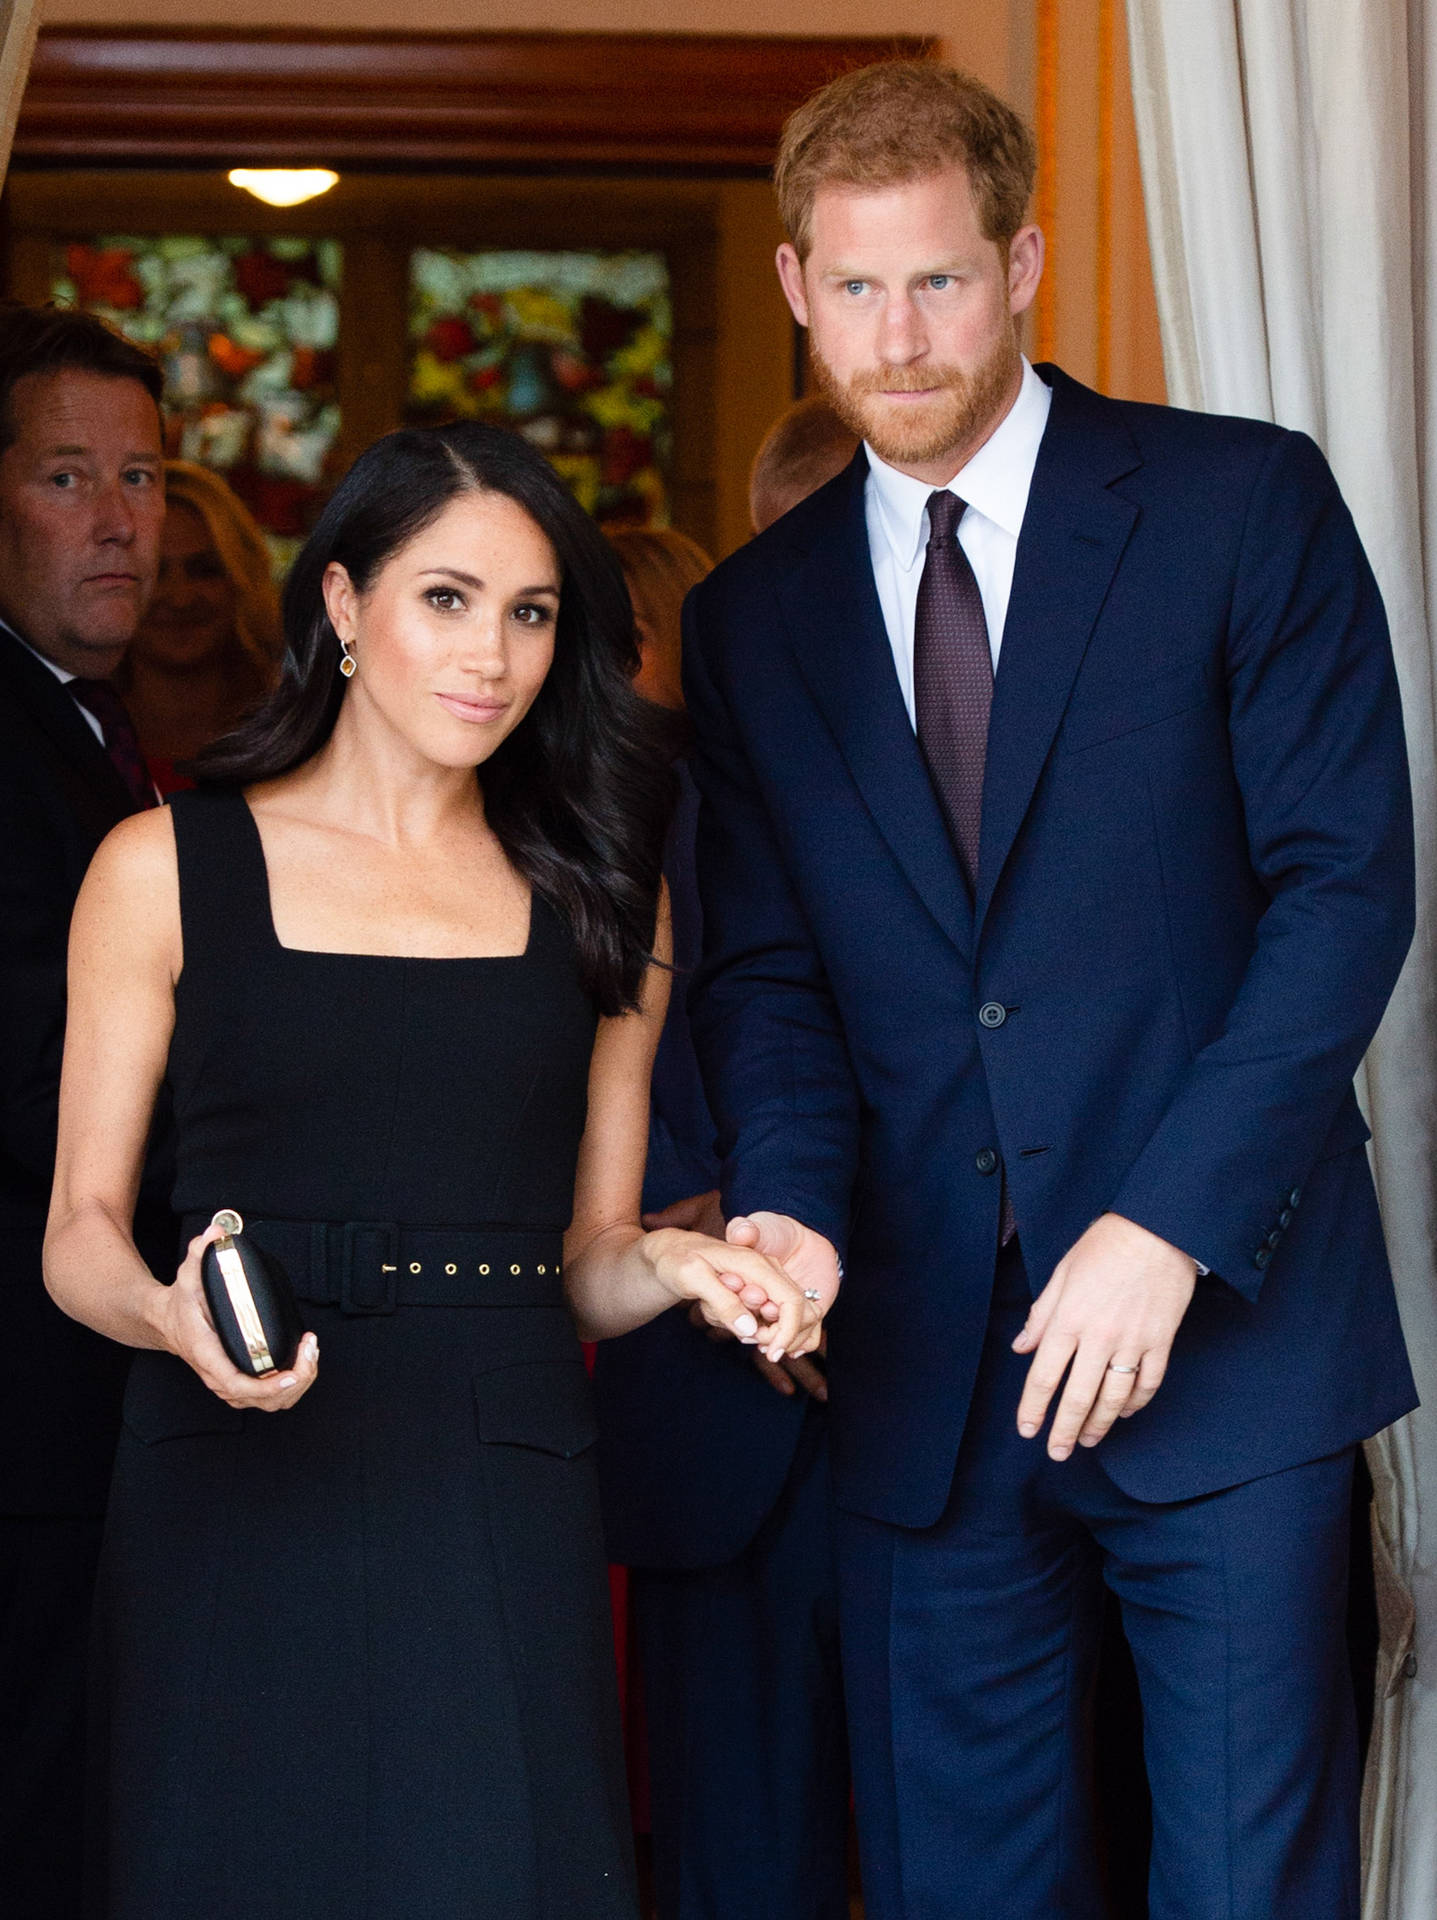 "Prince Harry in a thoughtful moment with Meghan Markle in the background." Wallpaper